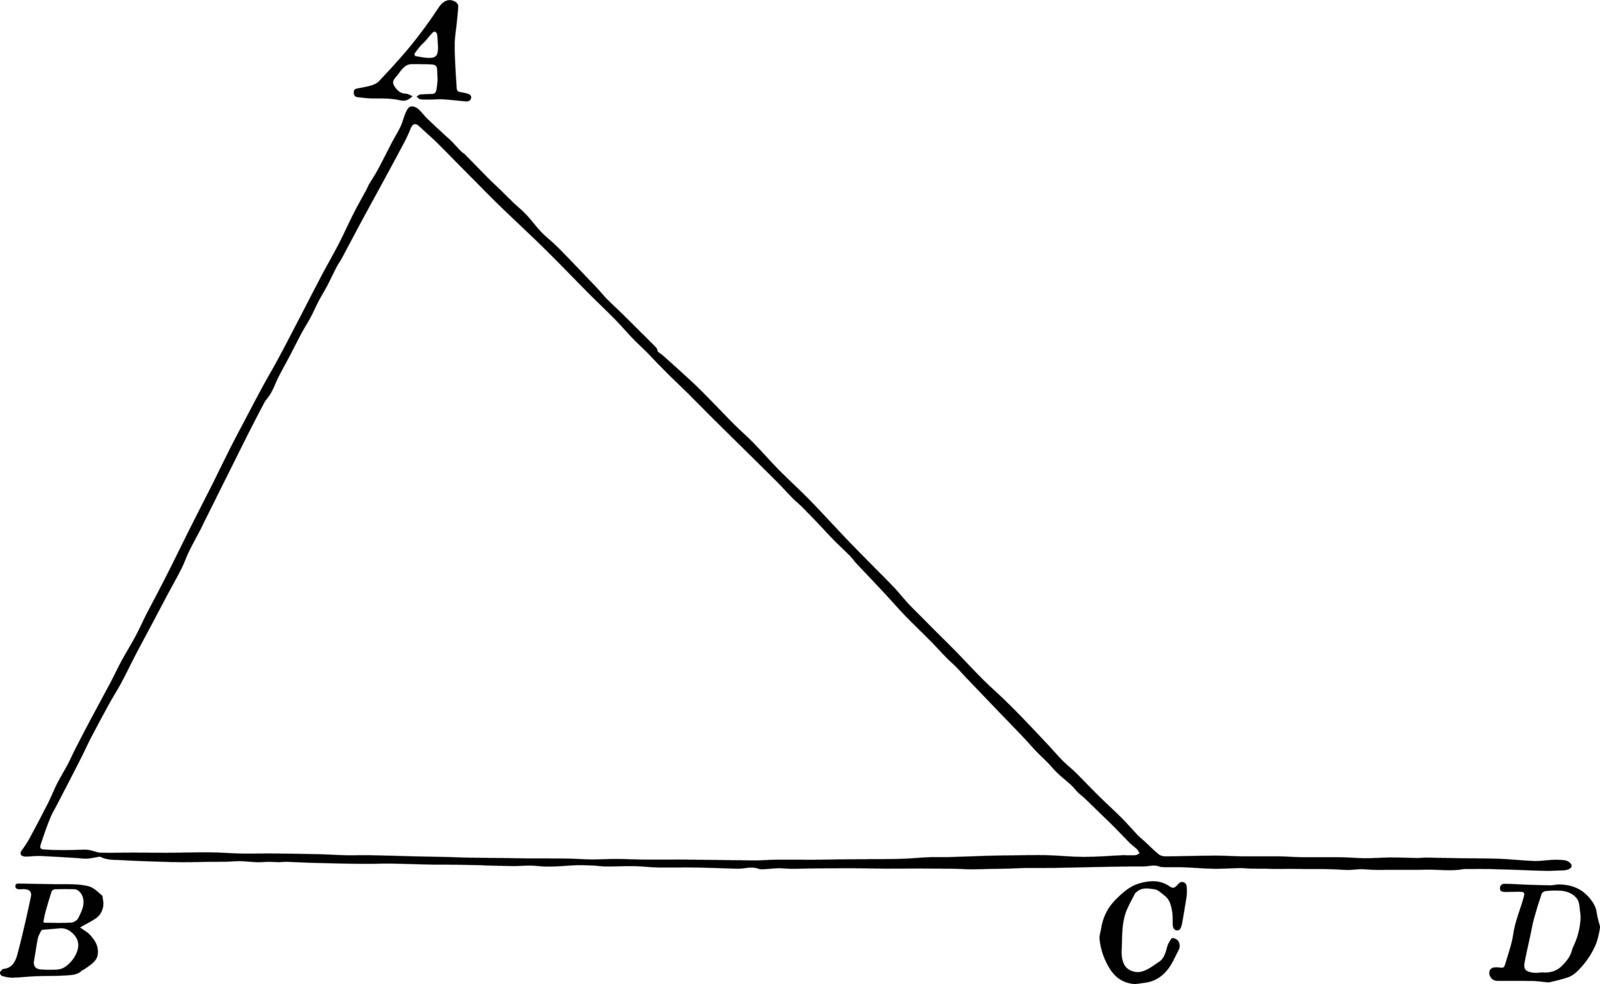 The image showing the triangle ABC with external angle ACD, vintage line drawing or engraving illustration.